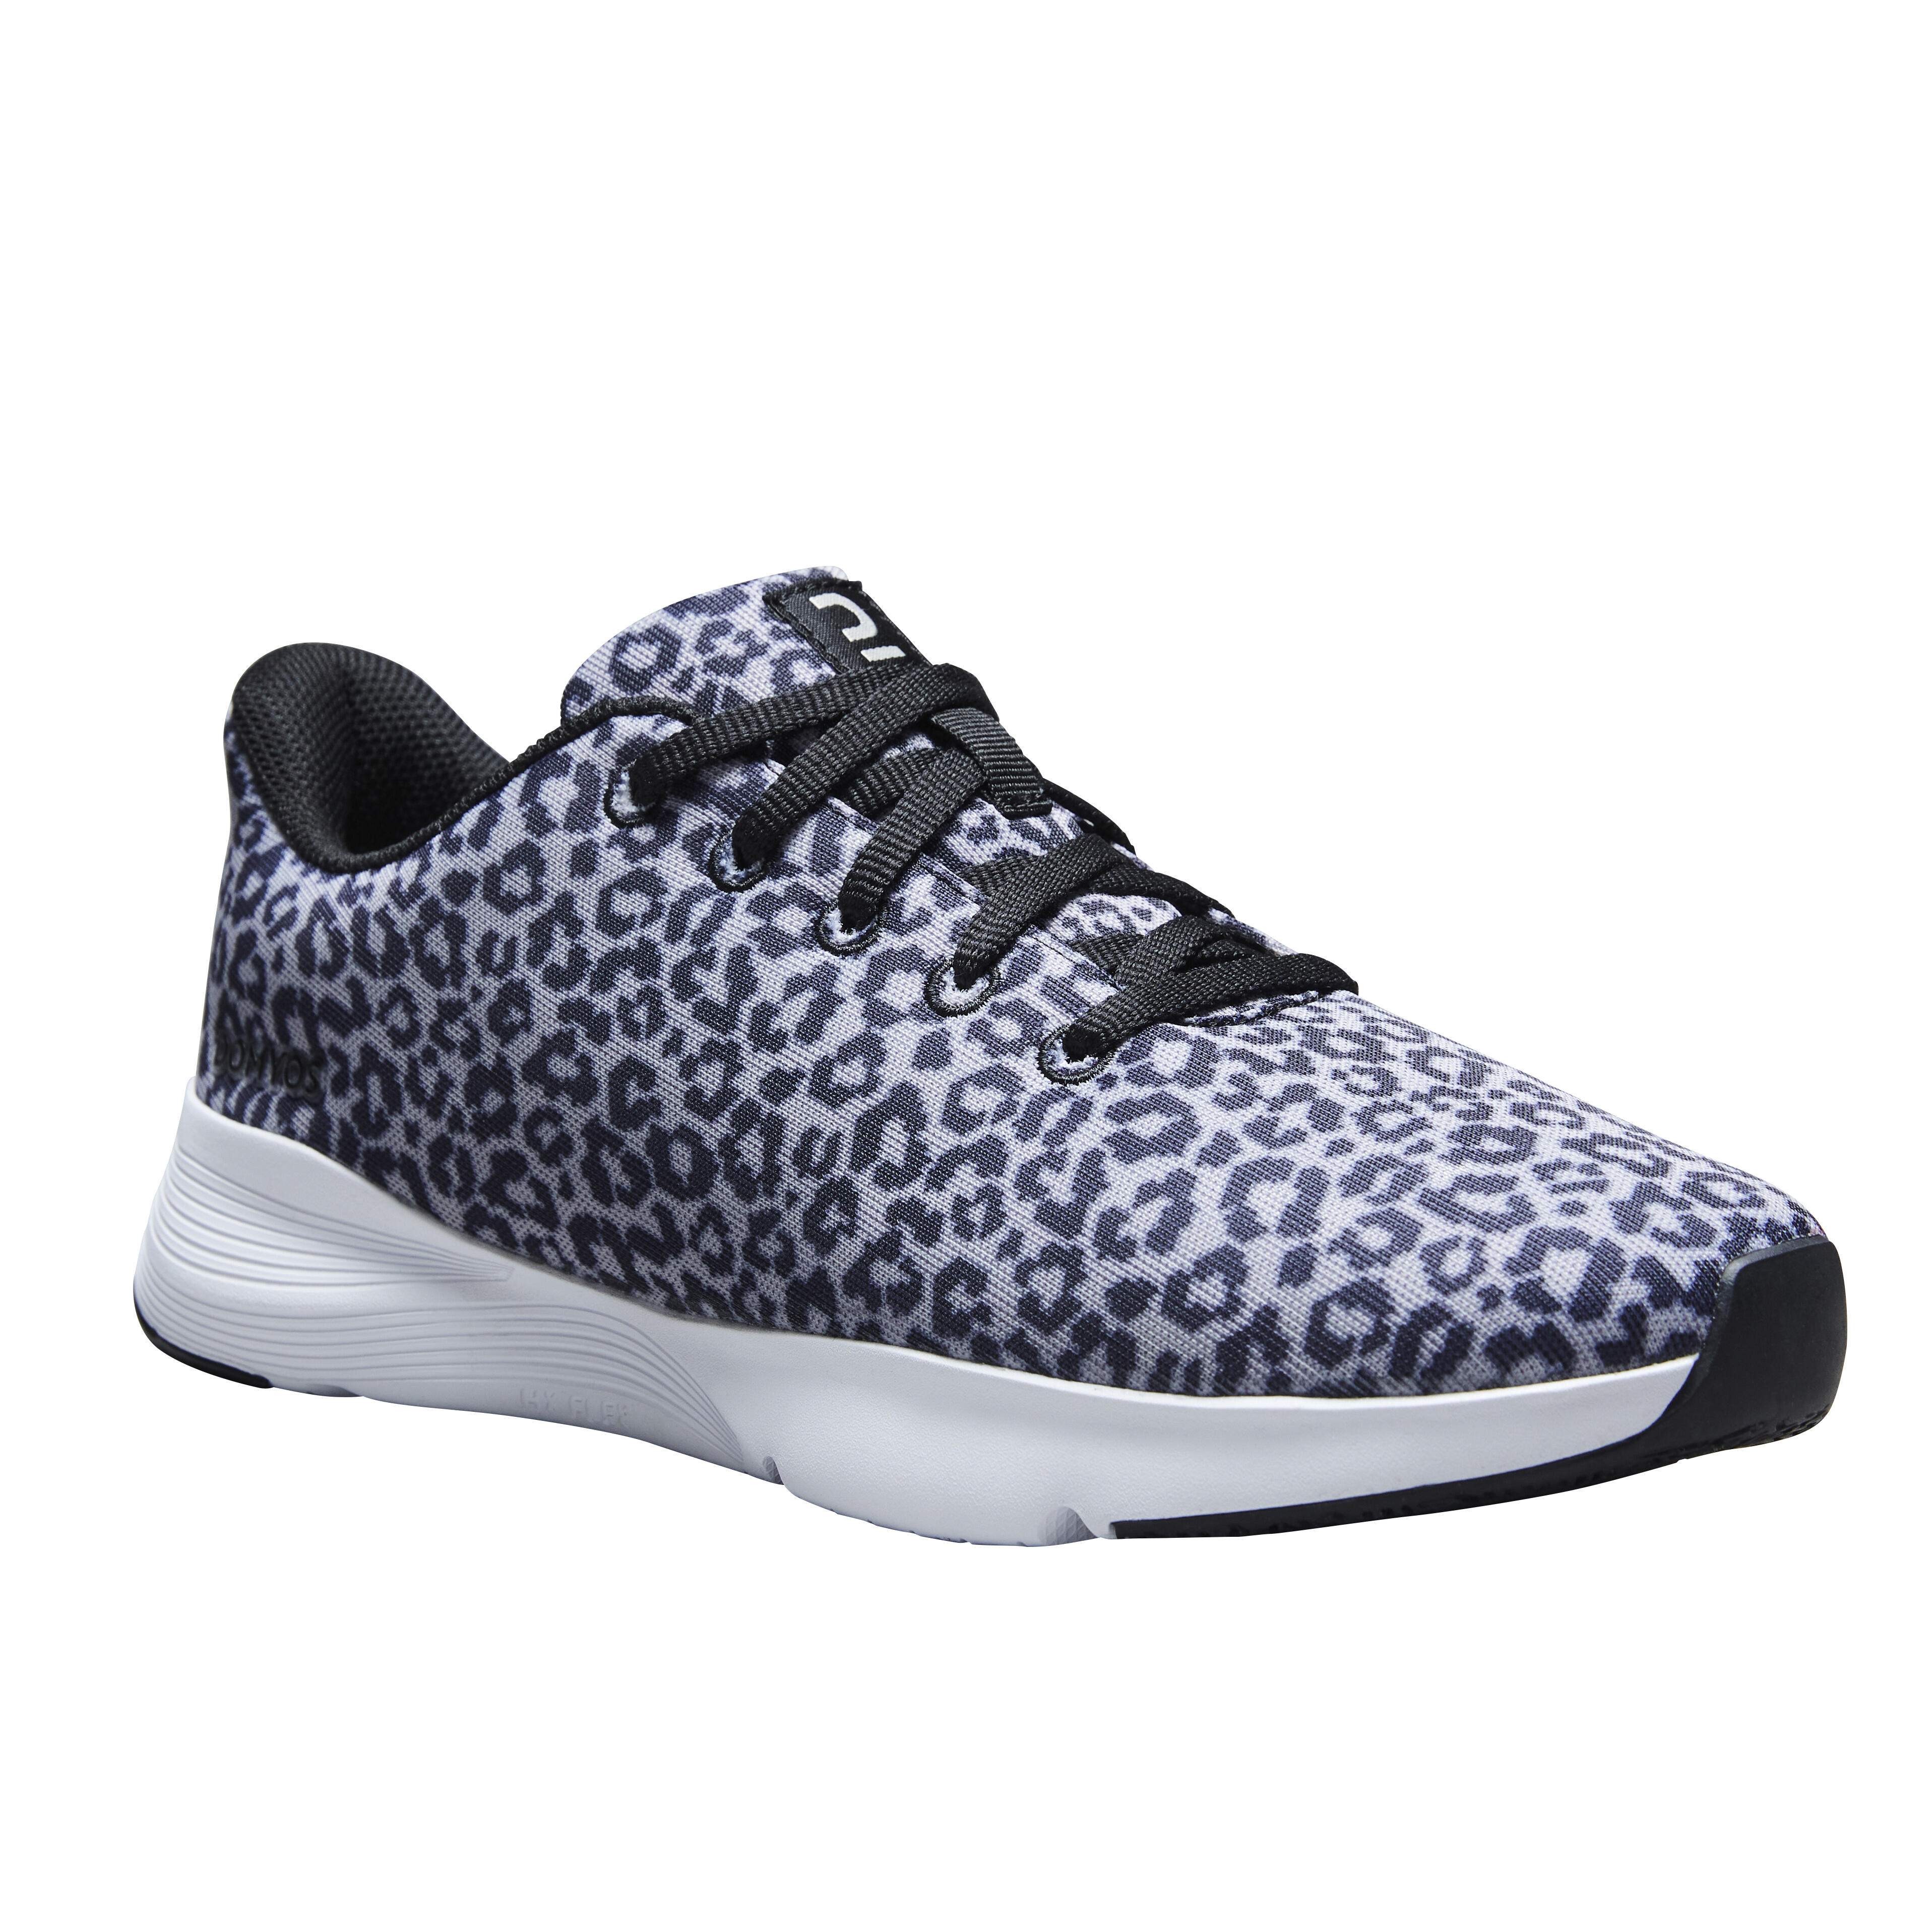 Women's Fitness Shoes 120 - Leopard Print, Let Your Personality